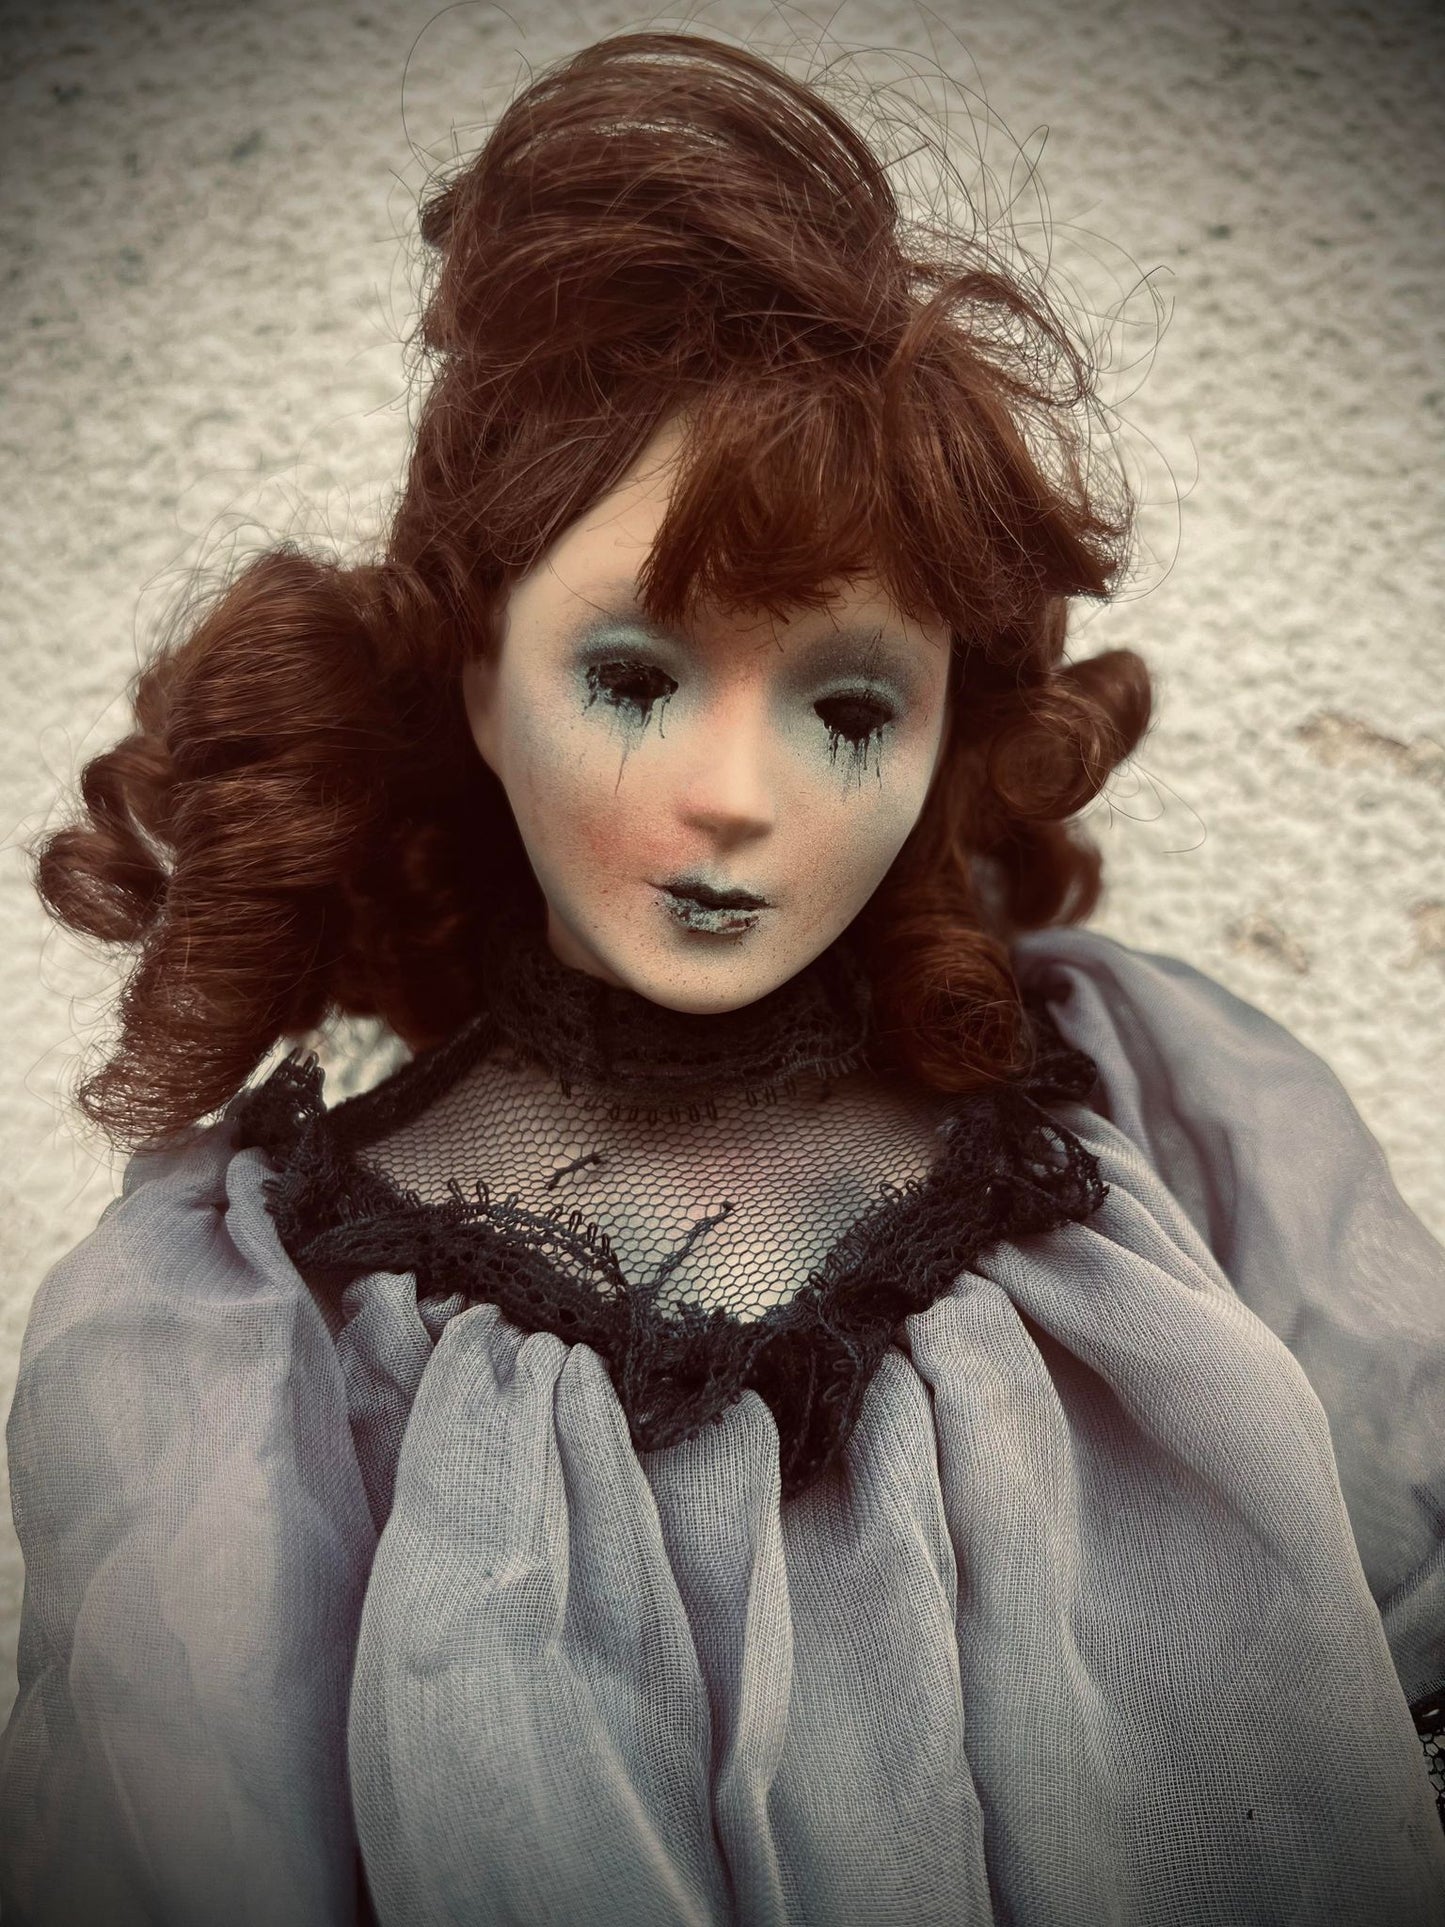 Meet Pamela 15" Doll Porcelain Zombie Undead Witchy Creepy Haunted Spirit Infected Scary Spooky Possessed Positive Oddity Gift Idea